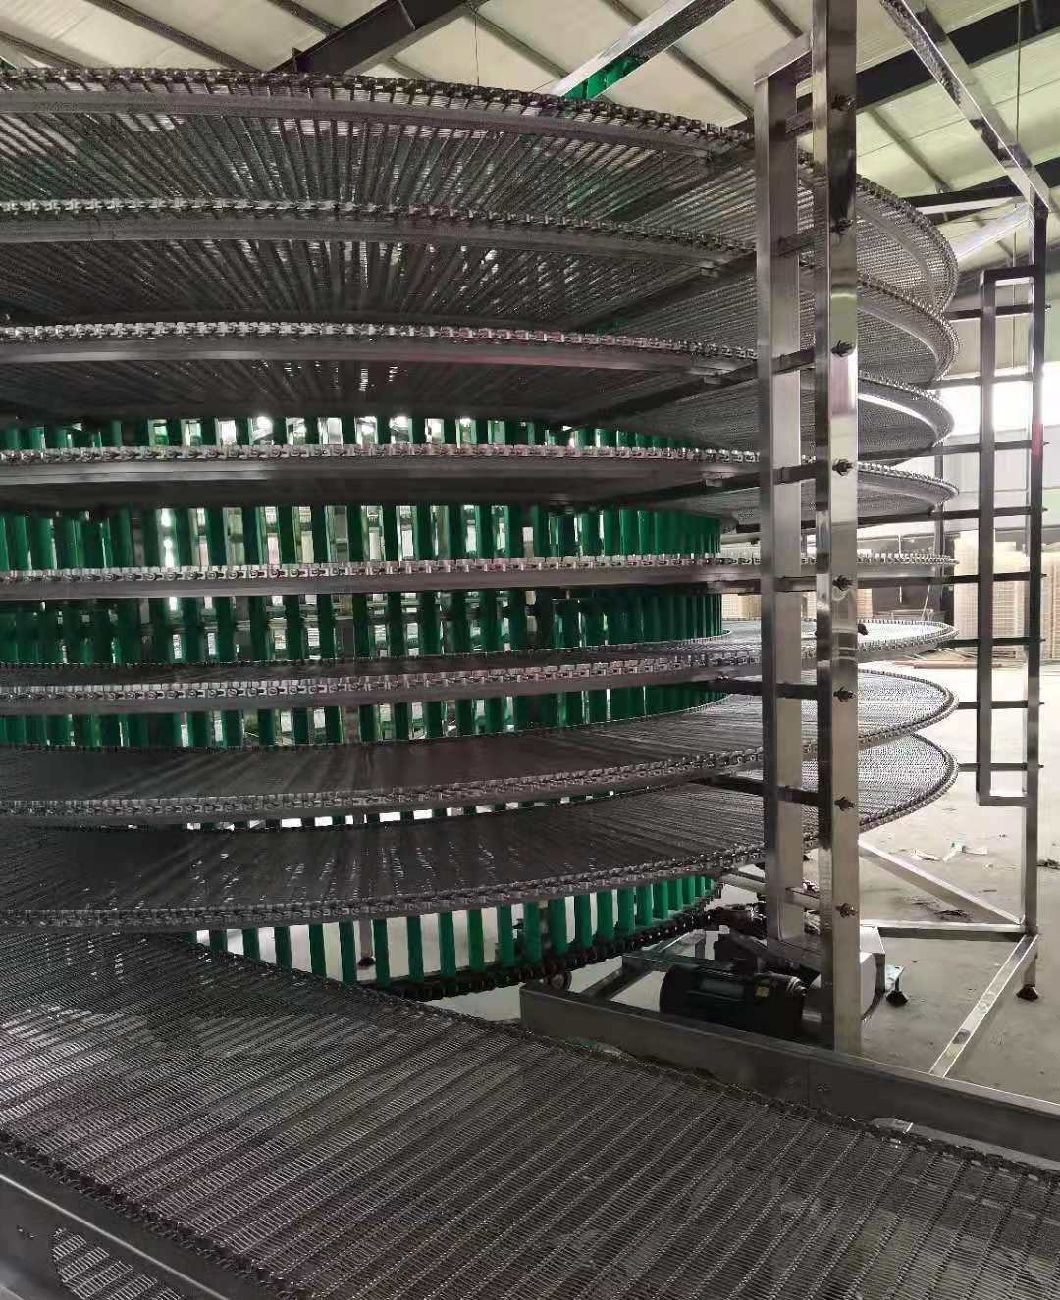 Plastic and Stainless Steel Spiral Cooling Tower Bakery Equipment